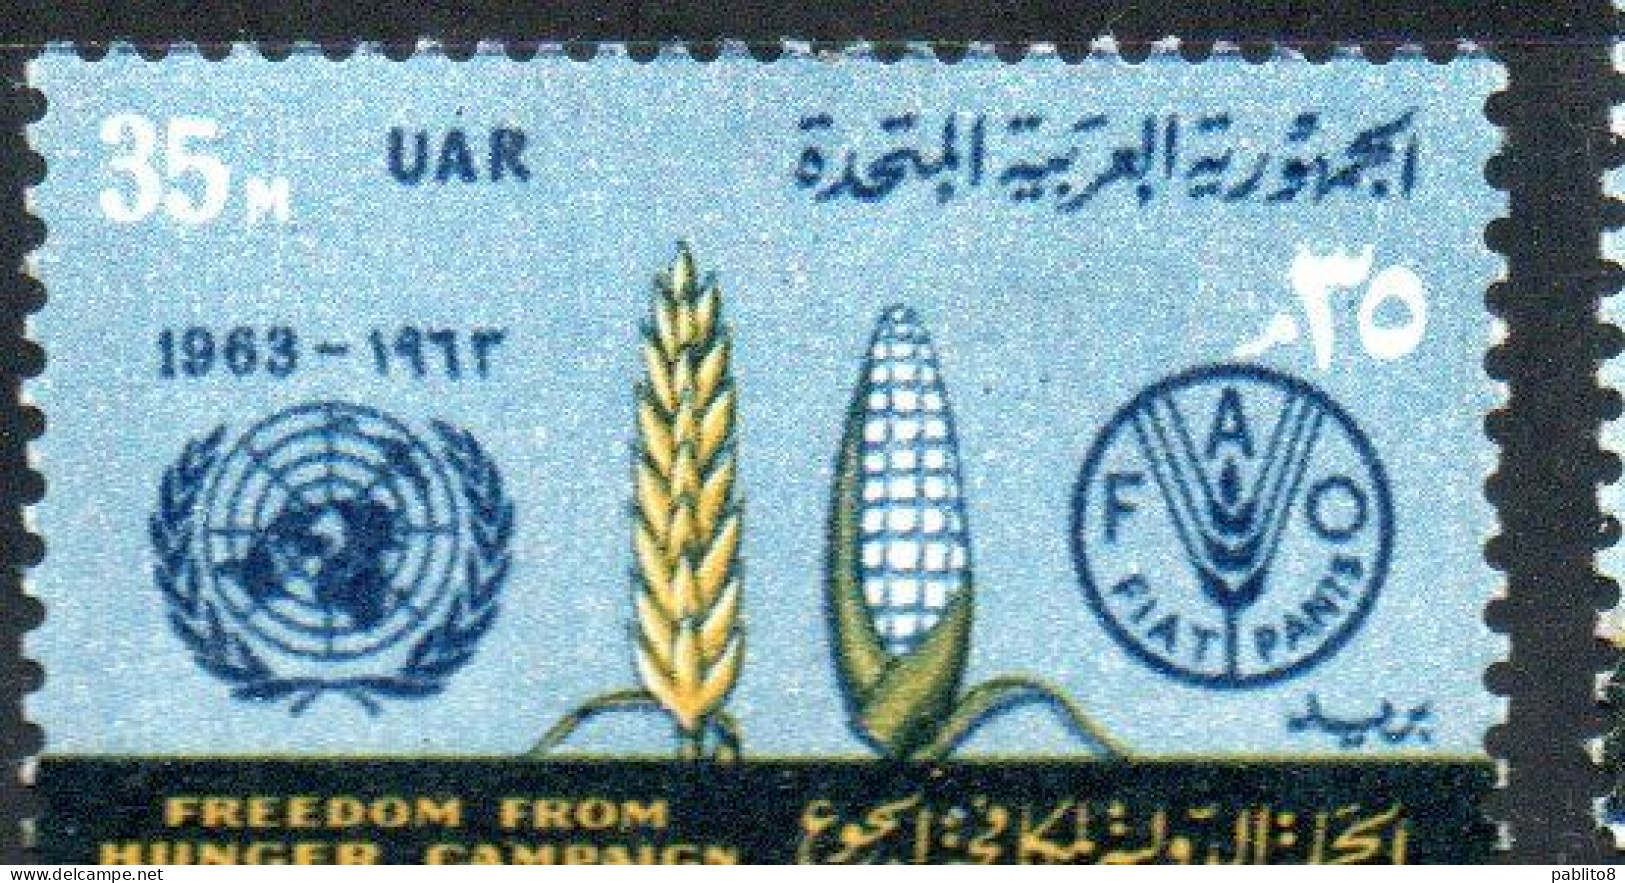 UAR EGYPT EGITTO 1963 FAO FREEDOM FROM HUNGER CAMPAIGN WHEAT CORN AND EMBLEMS 35m MH - Nuovi